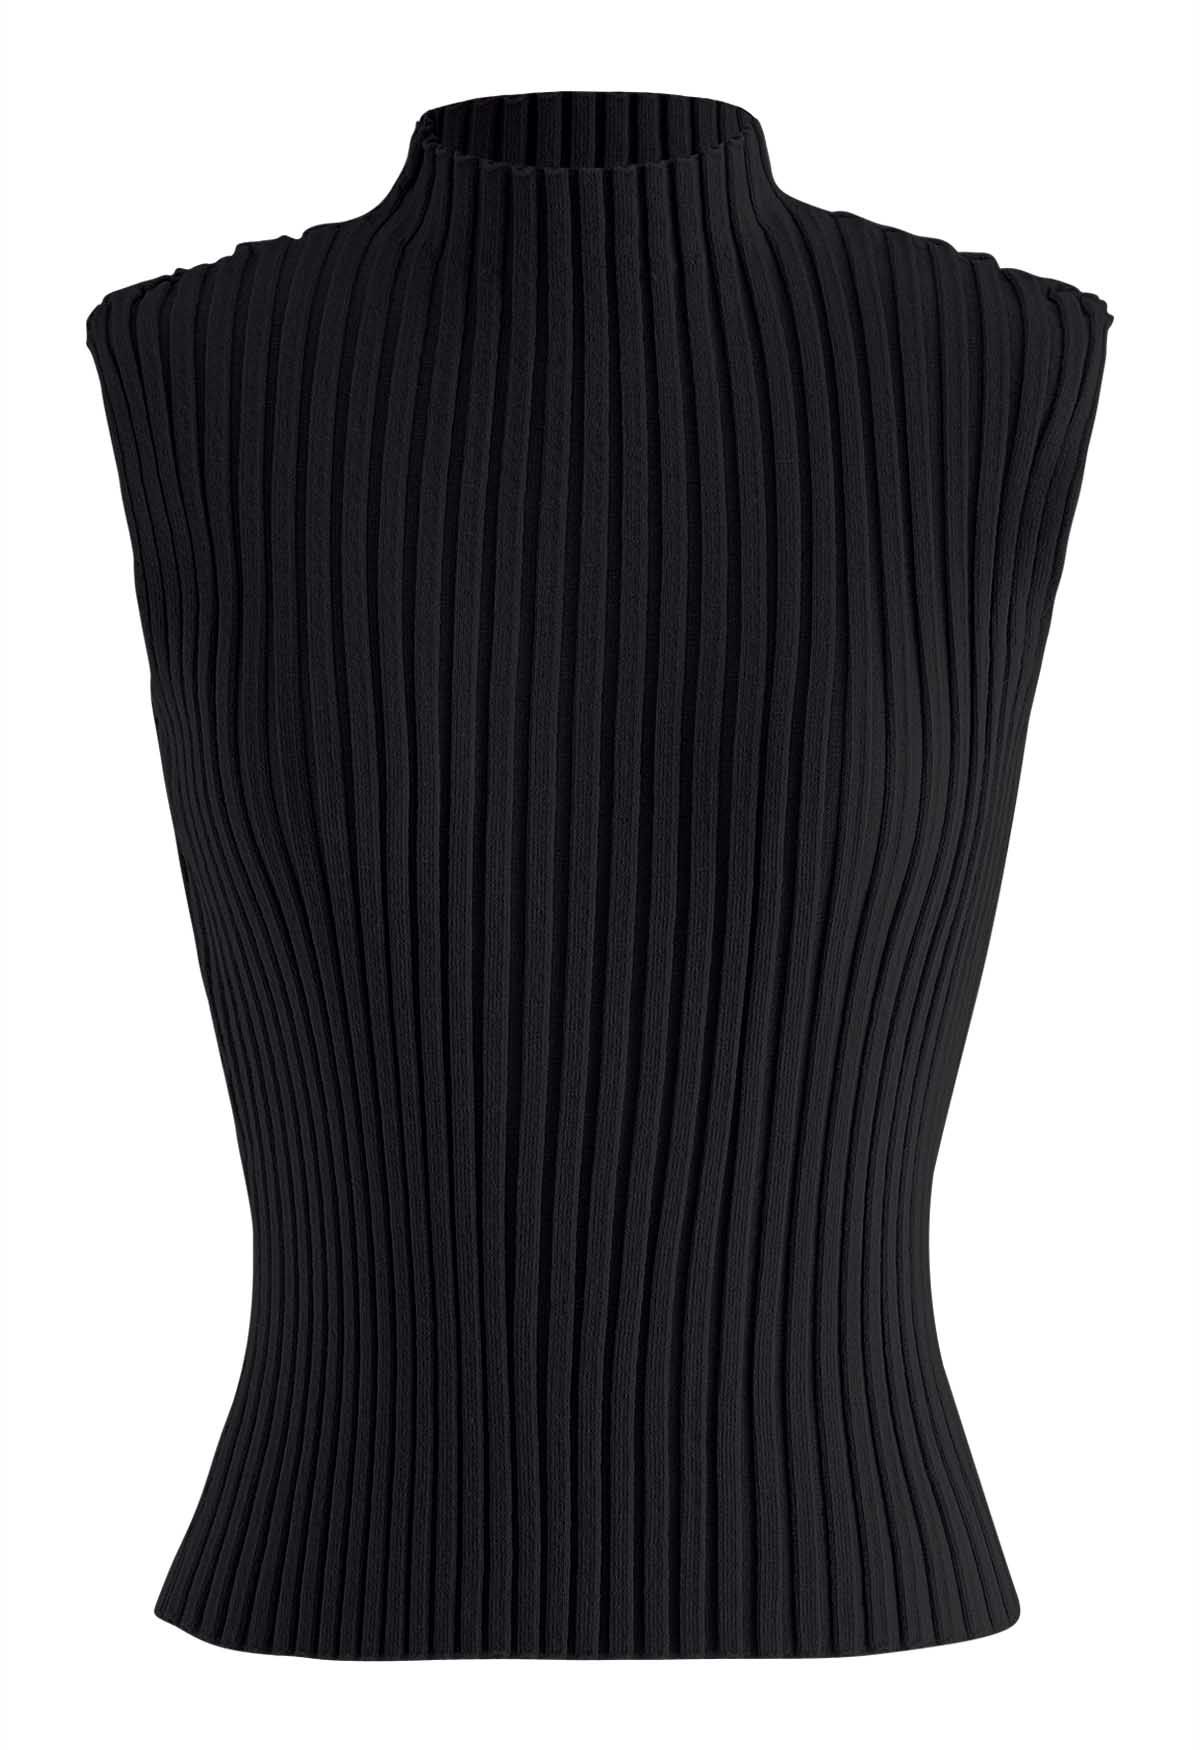 Mock Neck Sleeveless Rib Knit Top in Black - Retro, Indie and